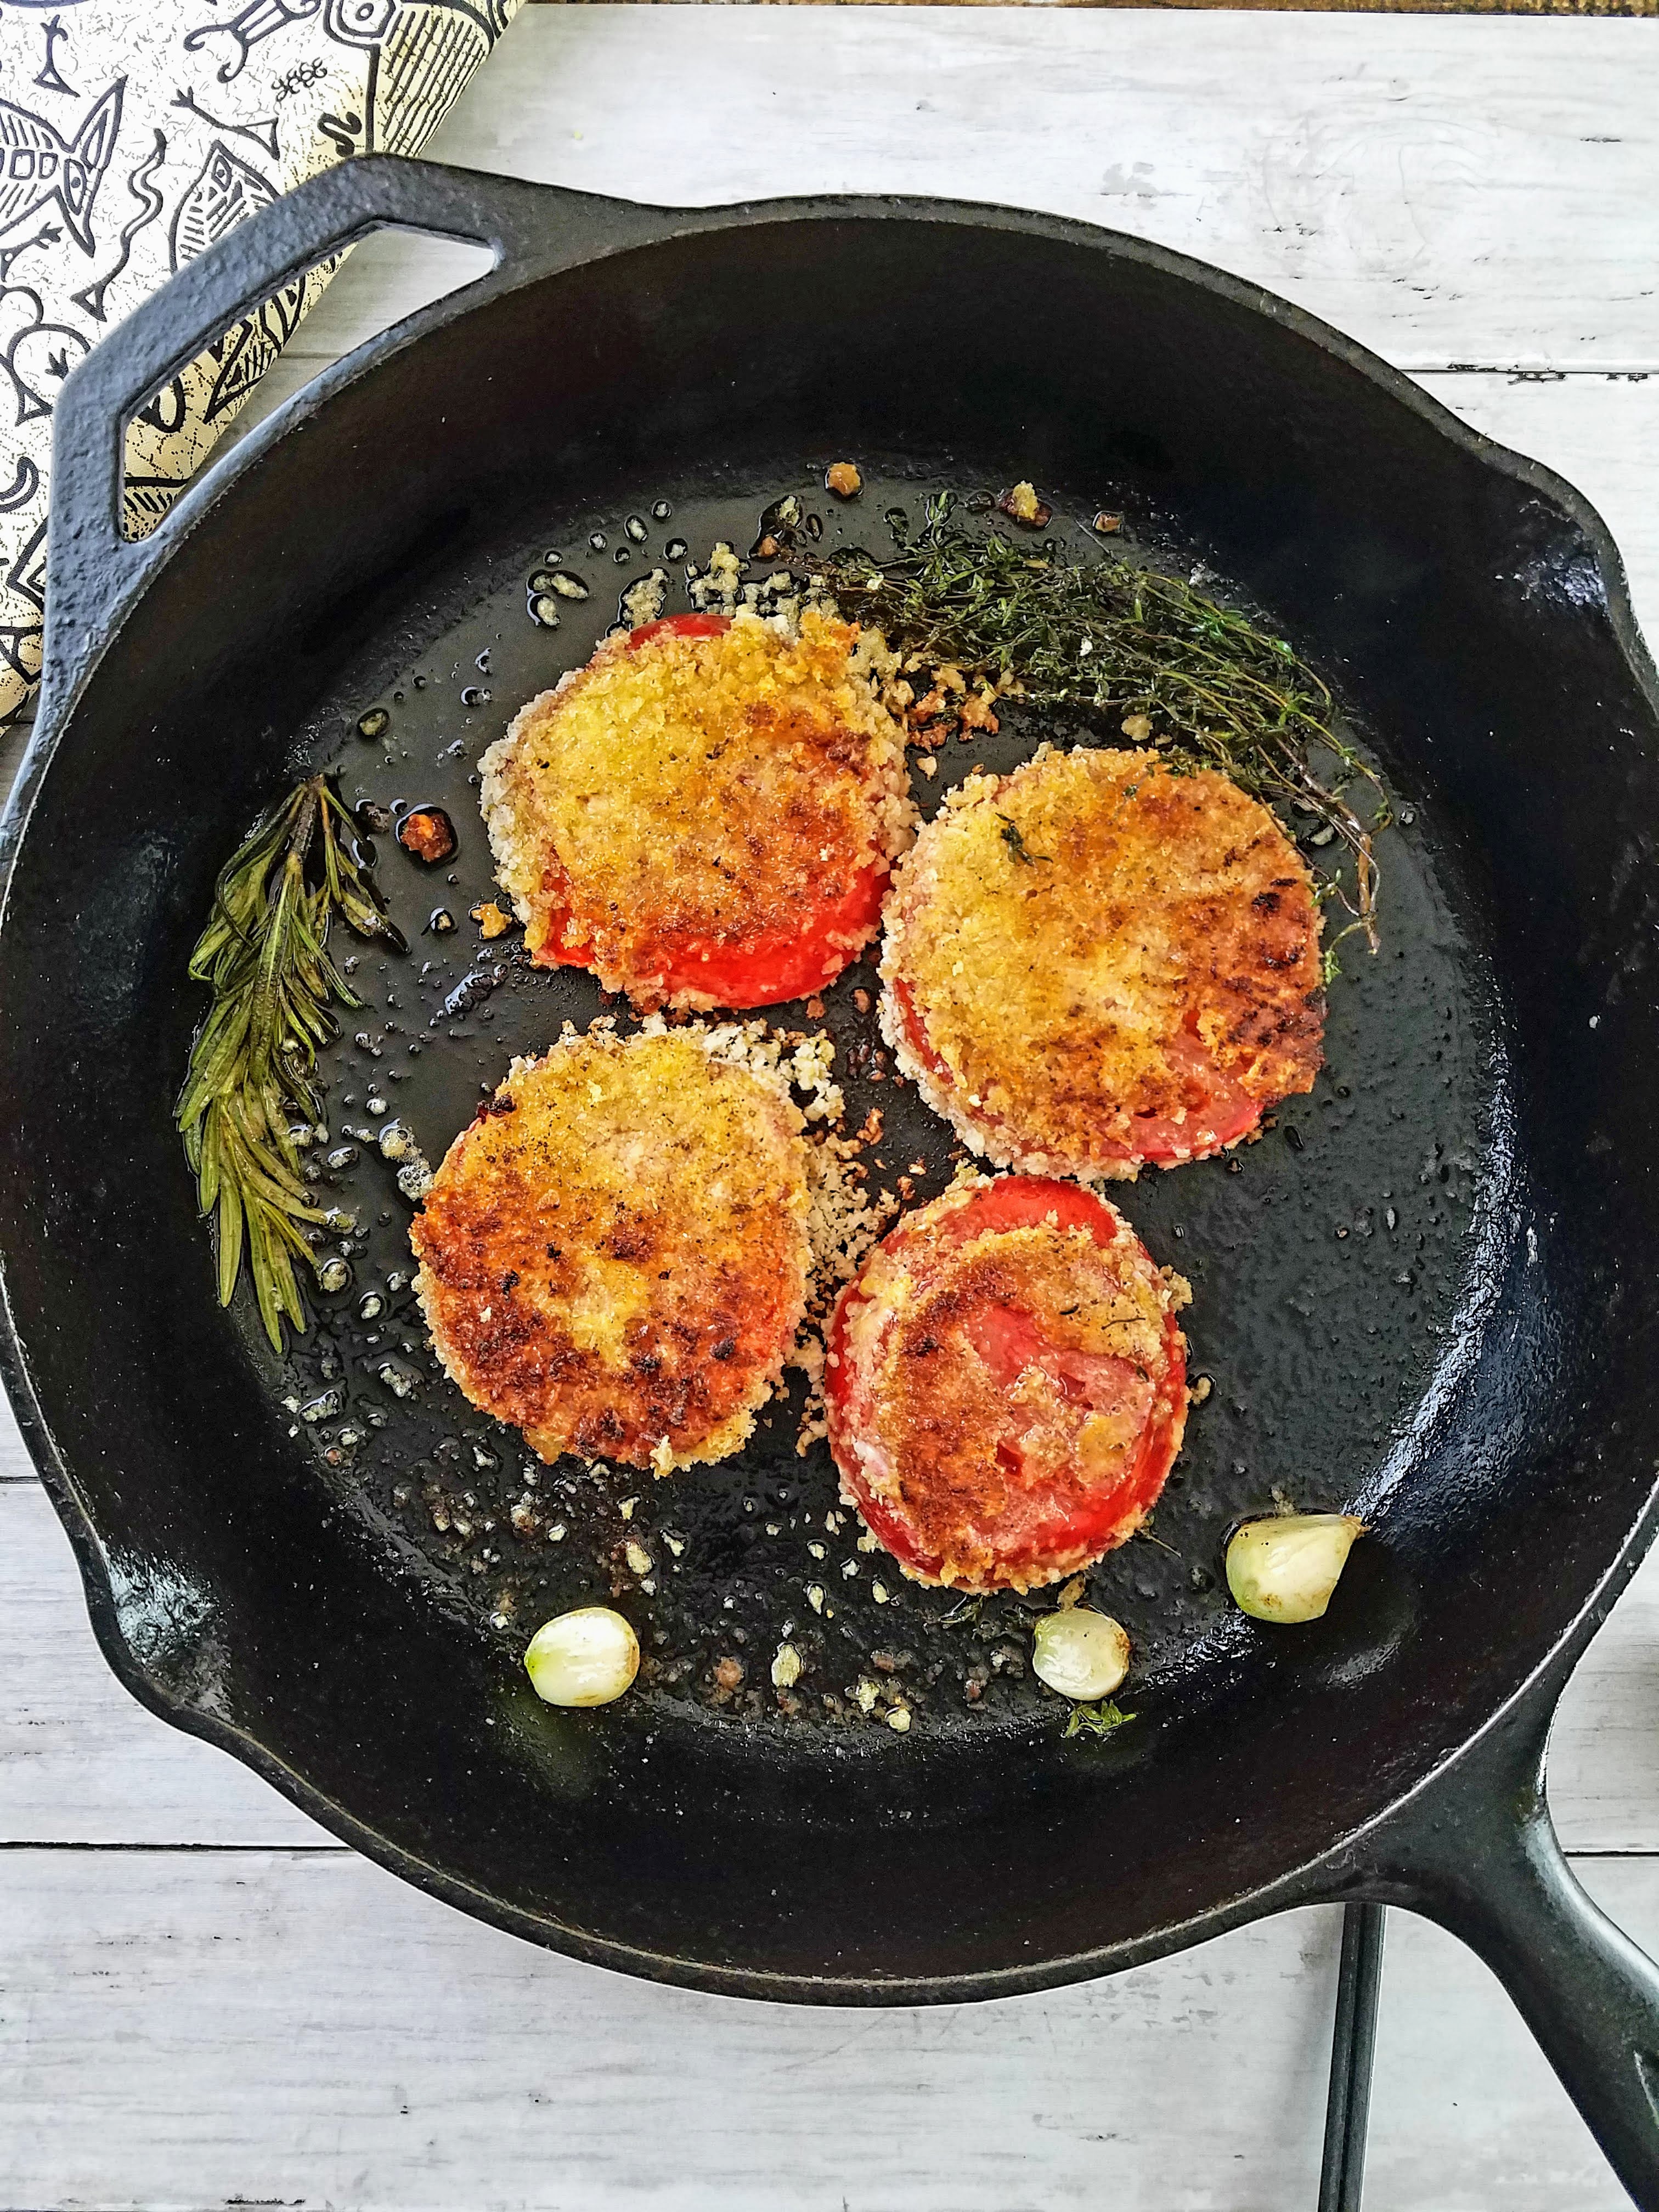 Fried Tomatoes are a good side dish with steak and eggs